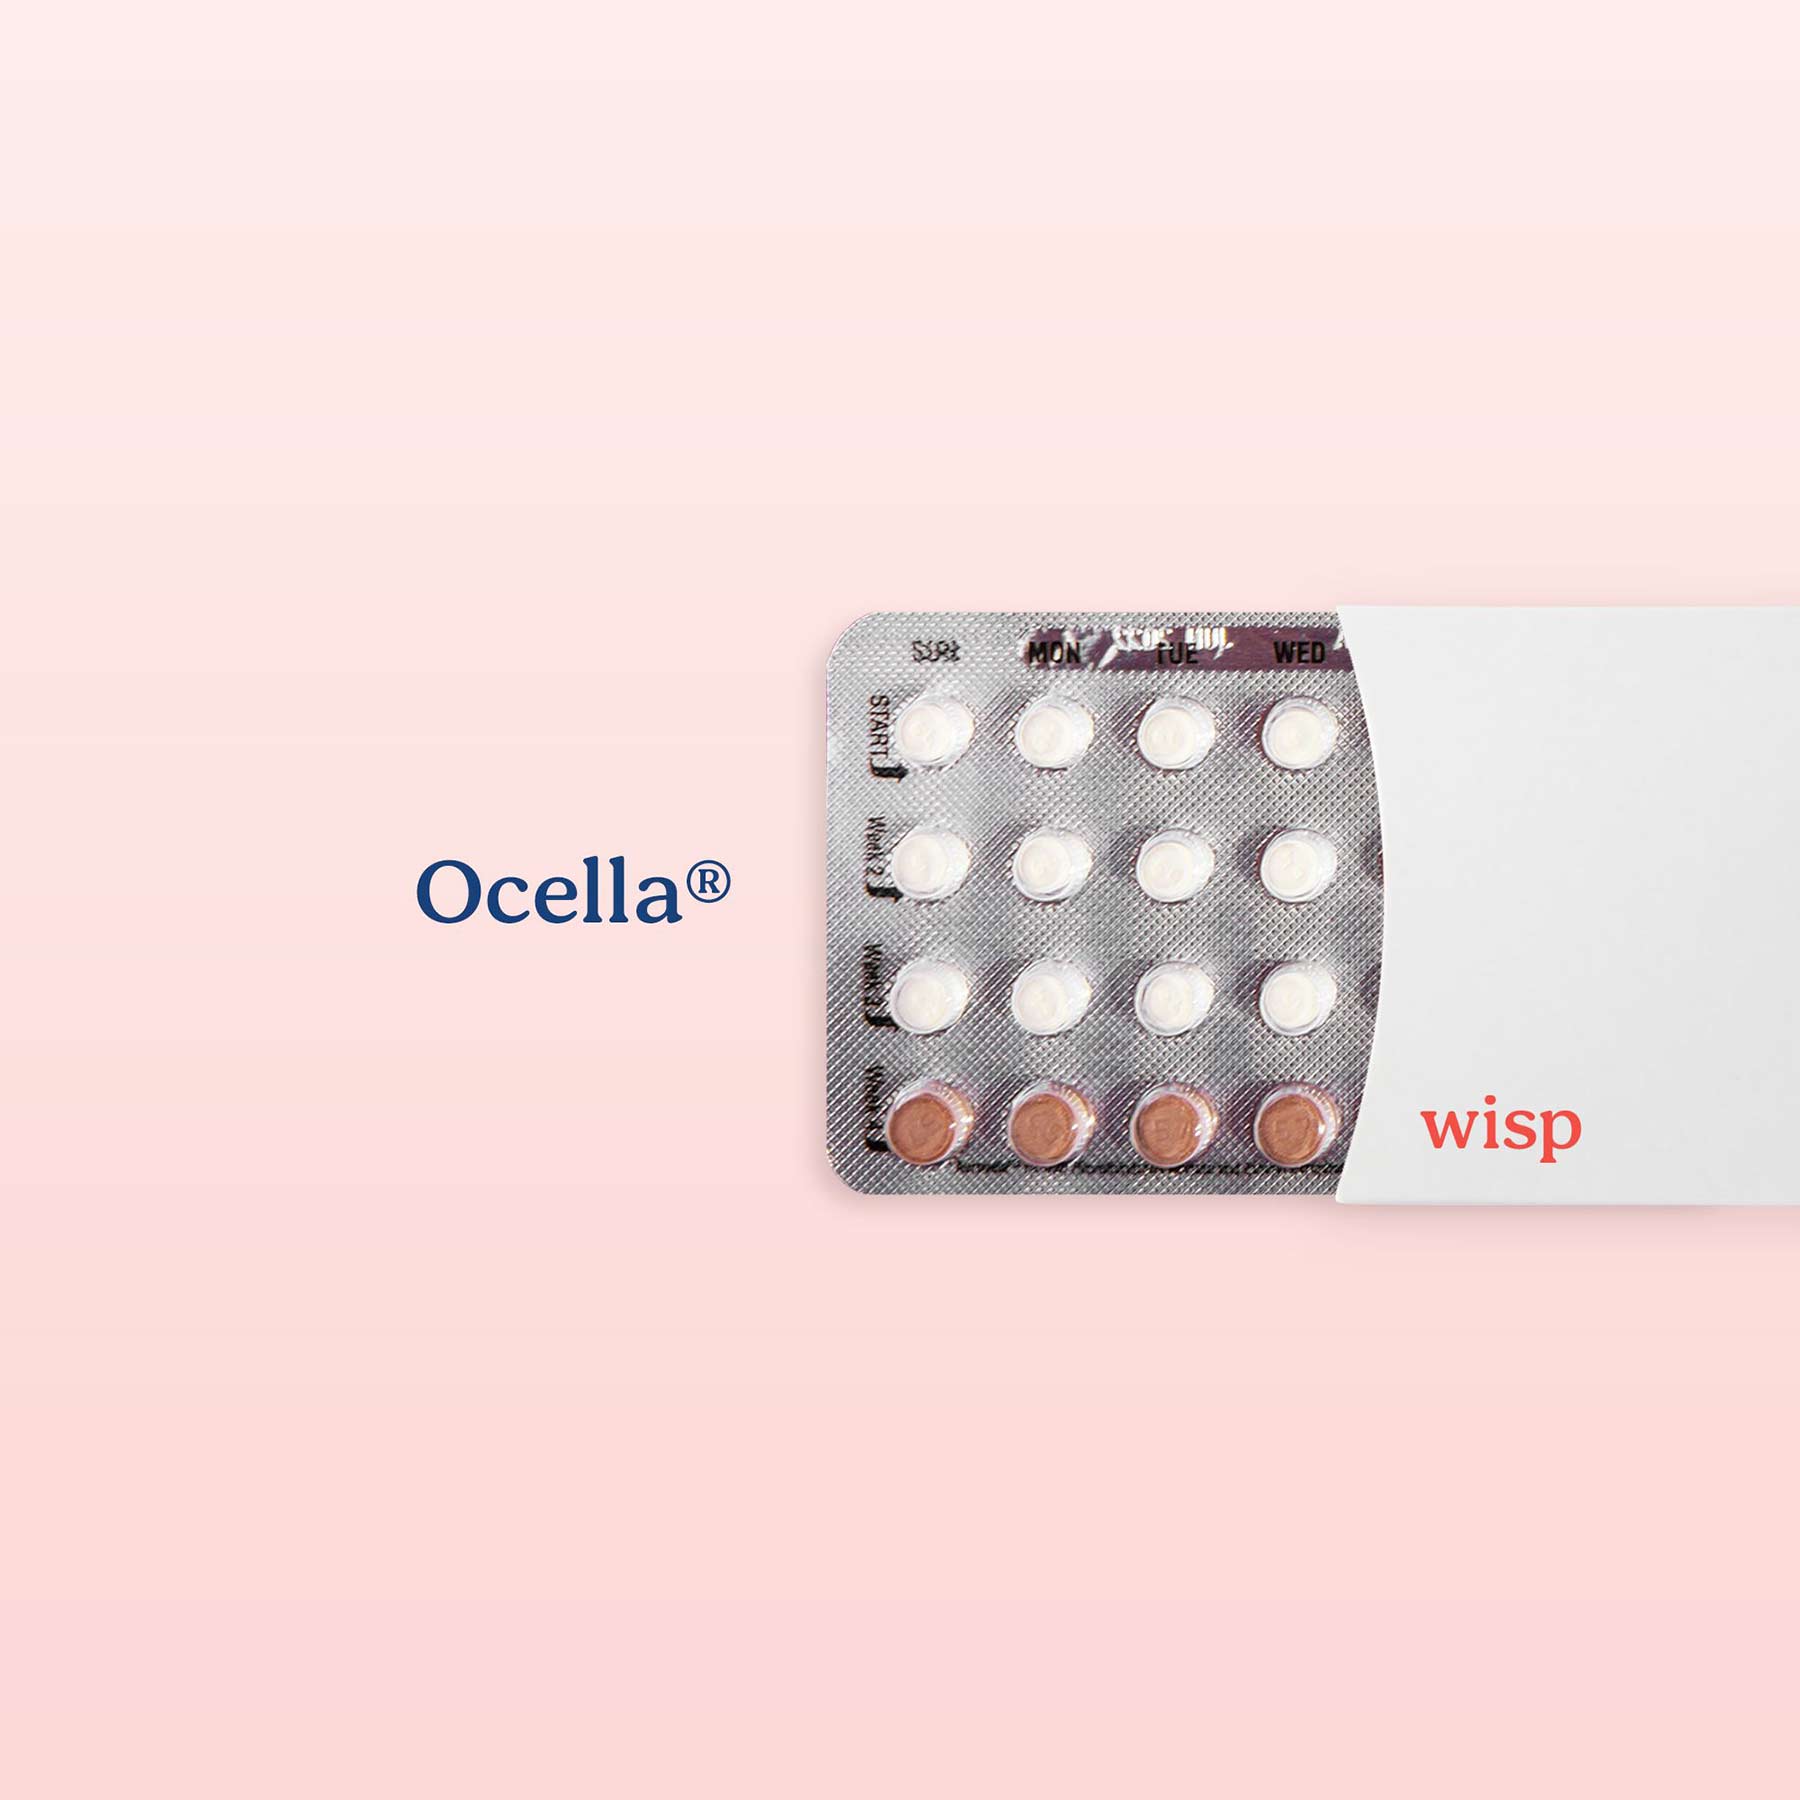 Packet of Ocella birth control pills on a pink background